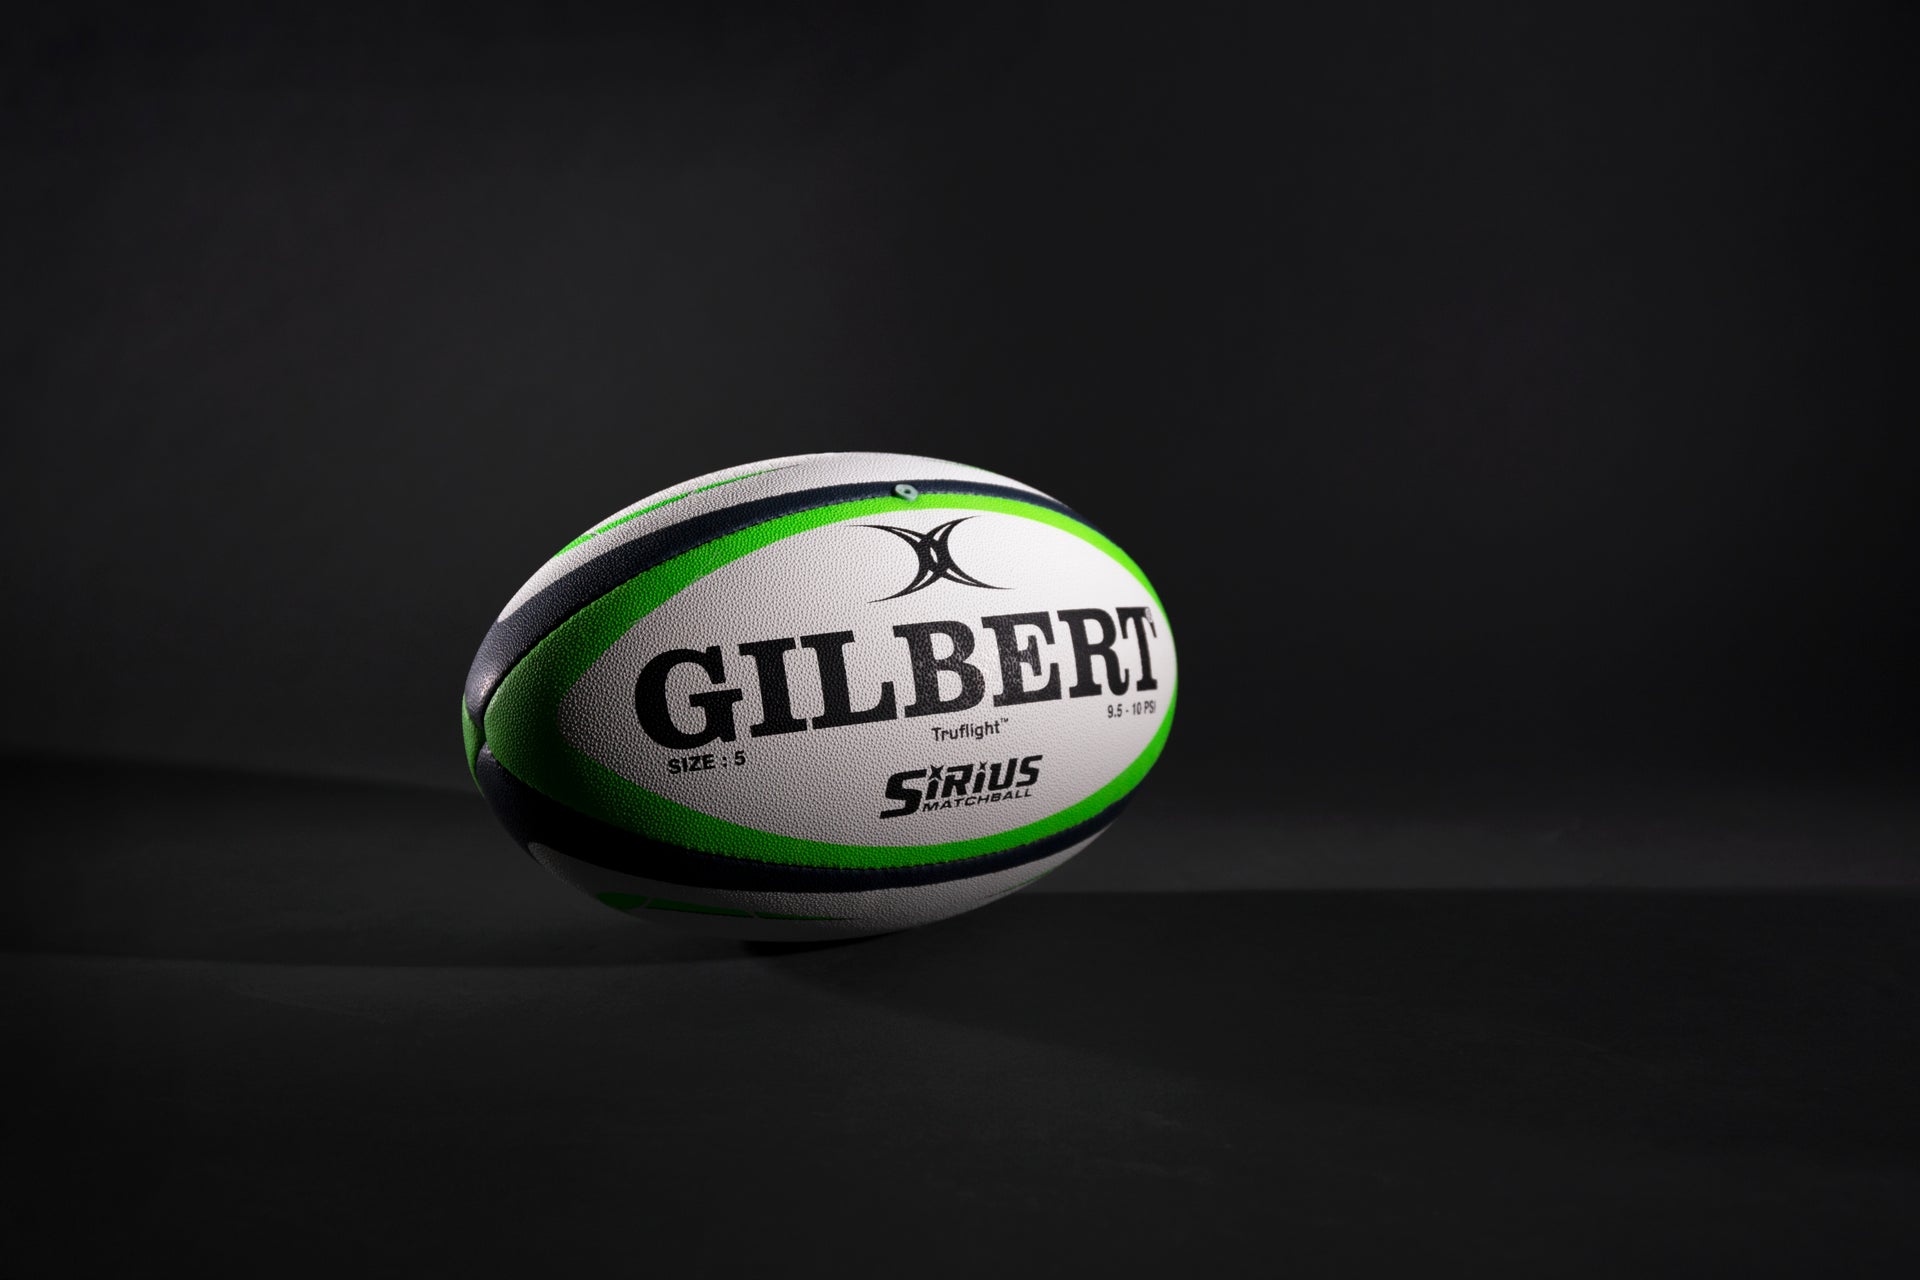 Sirius - The name behind the match ball